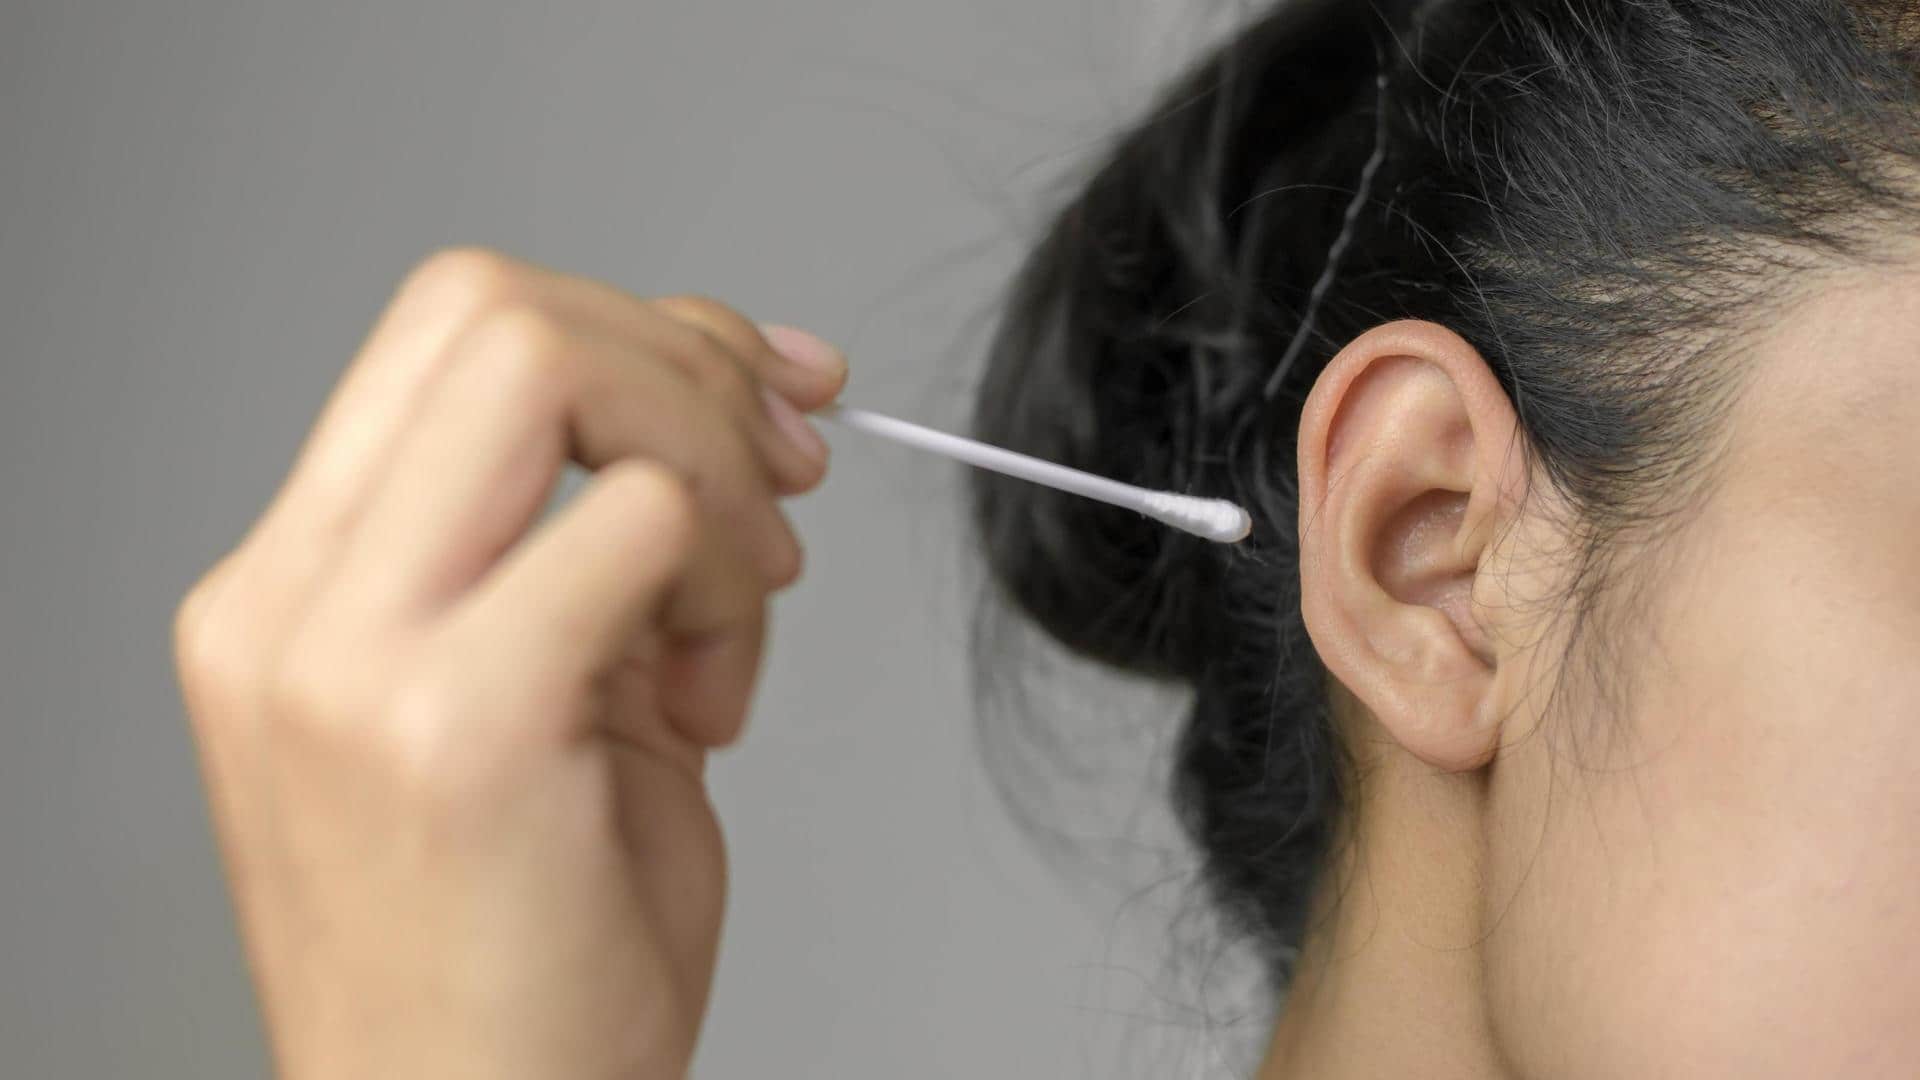 5 home remedies to clean your ears